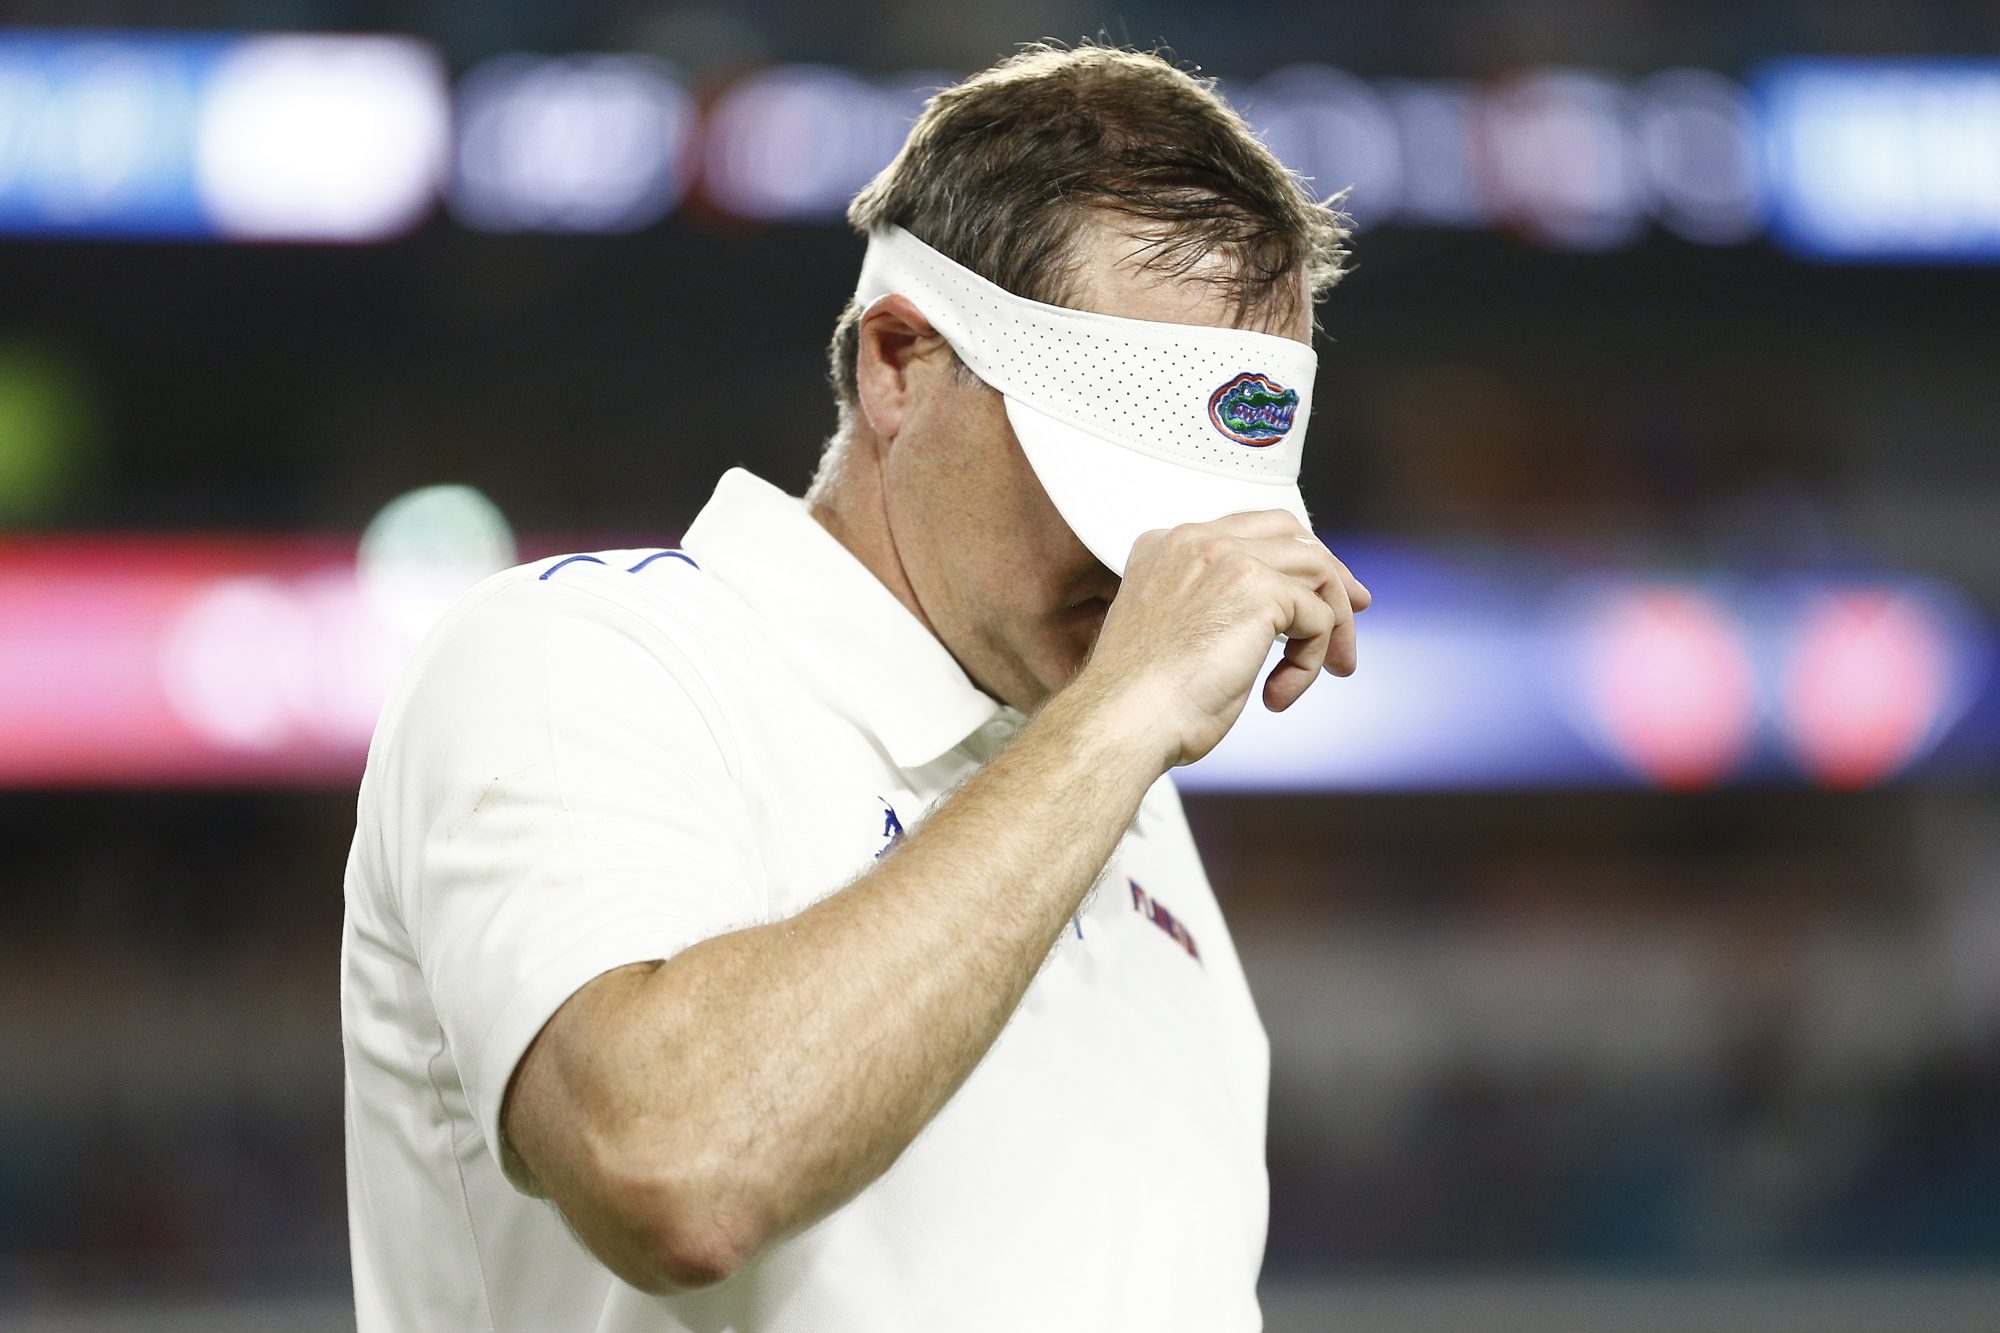 Dan Mullen, in happier times, covers his face with a visor.